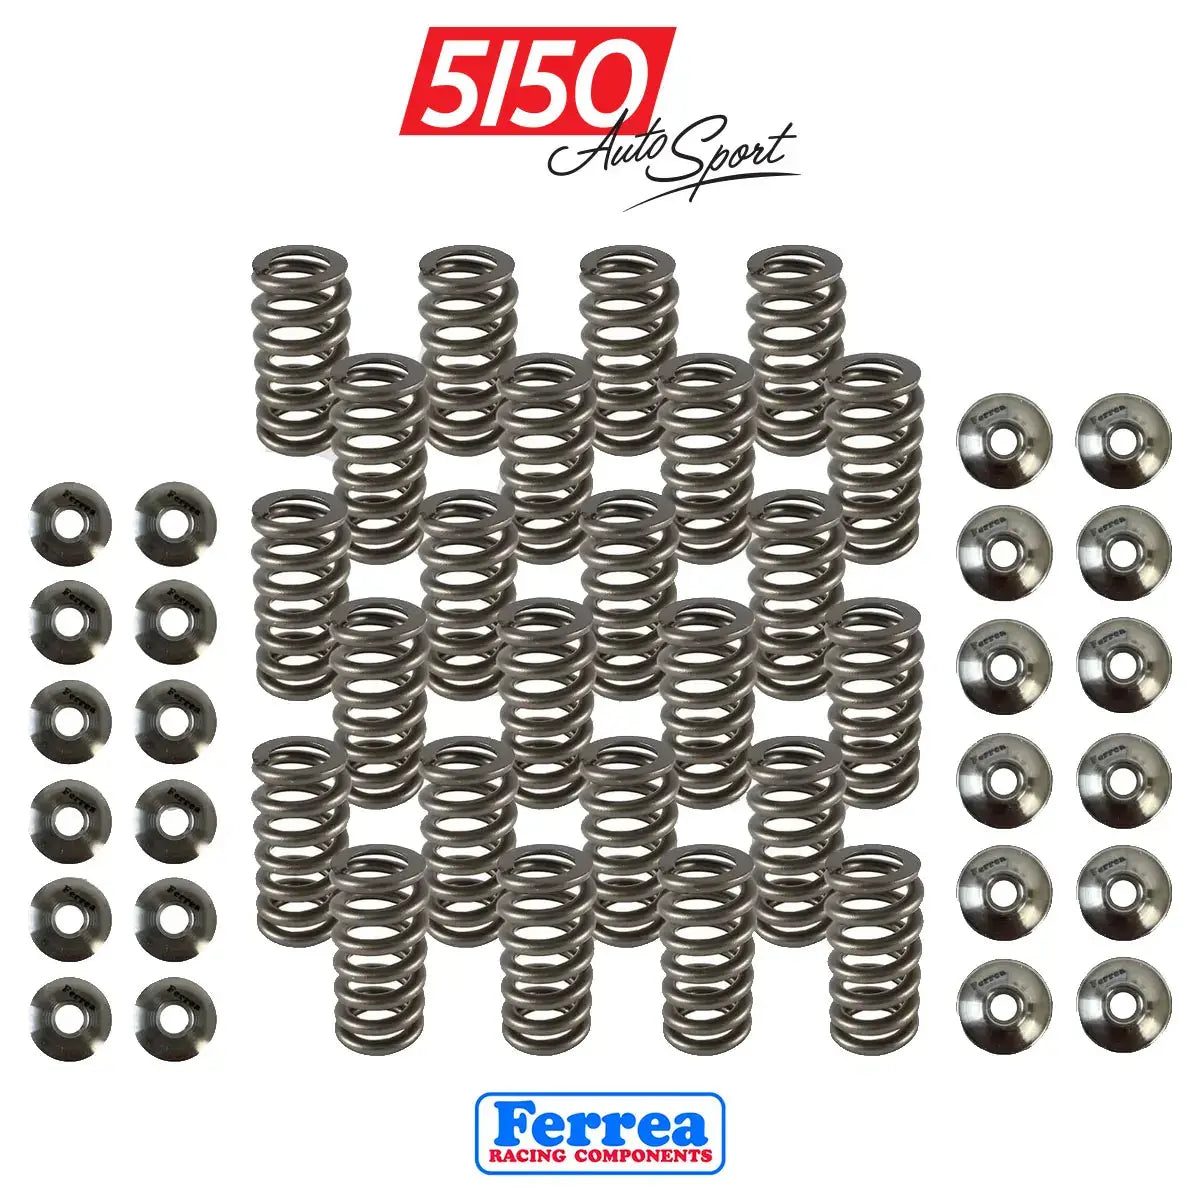 Racing Valve Spring Set for BMW and Toyota B58 Engines